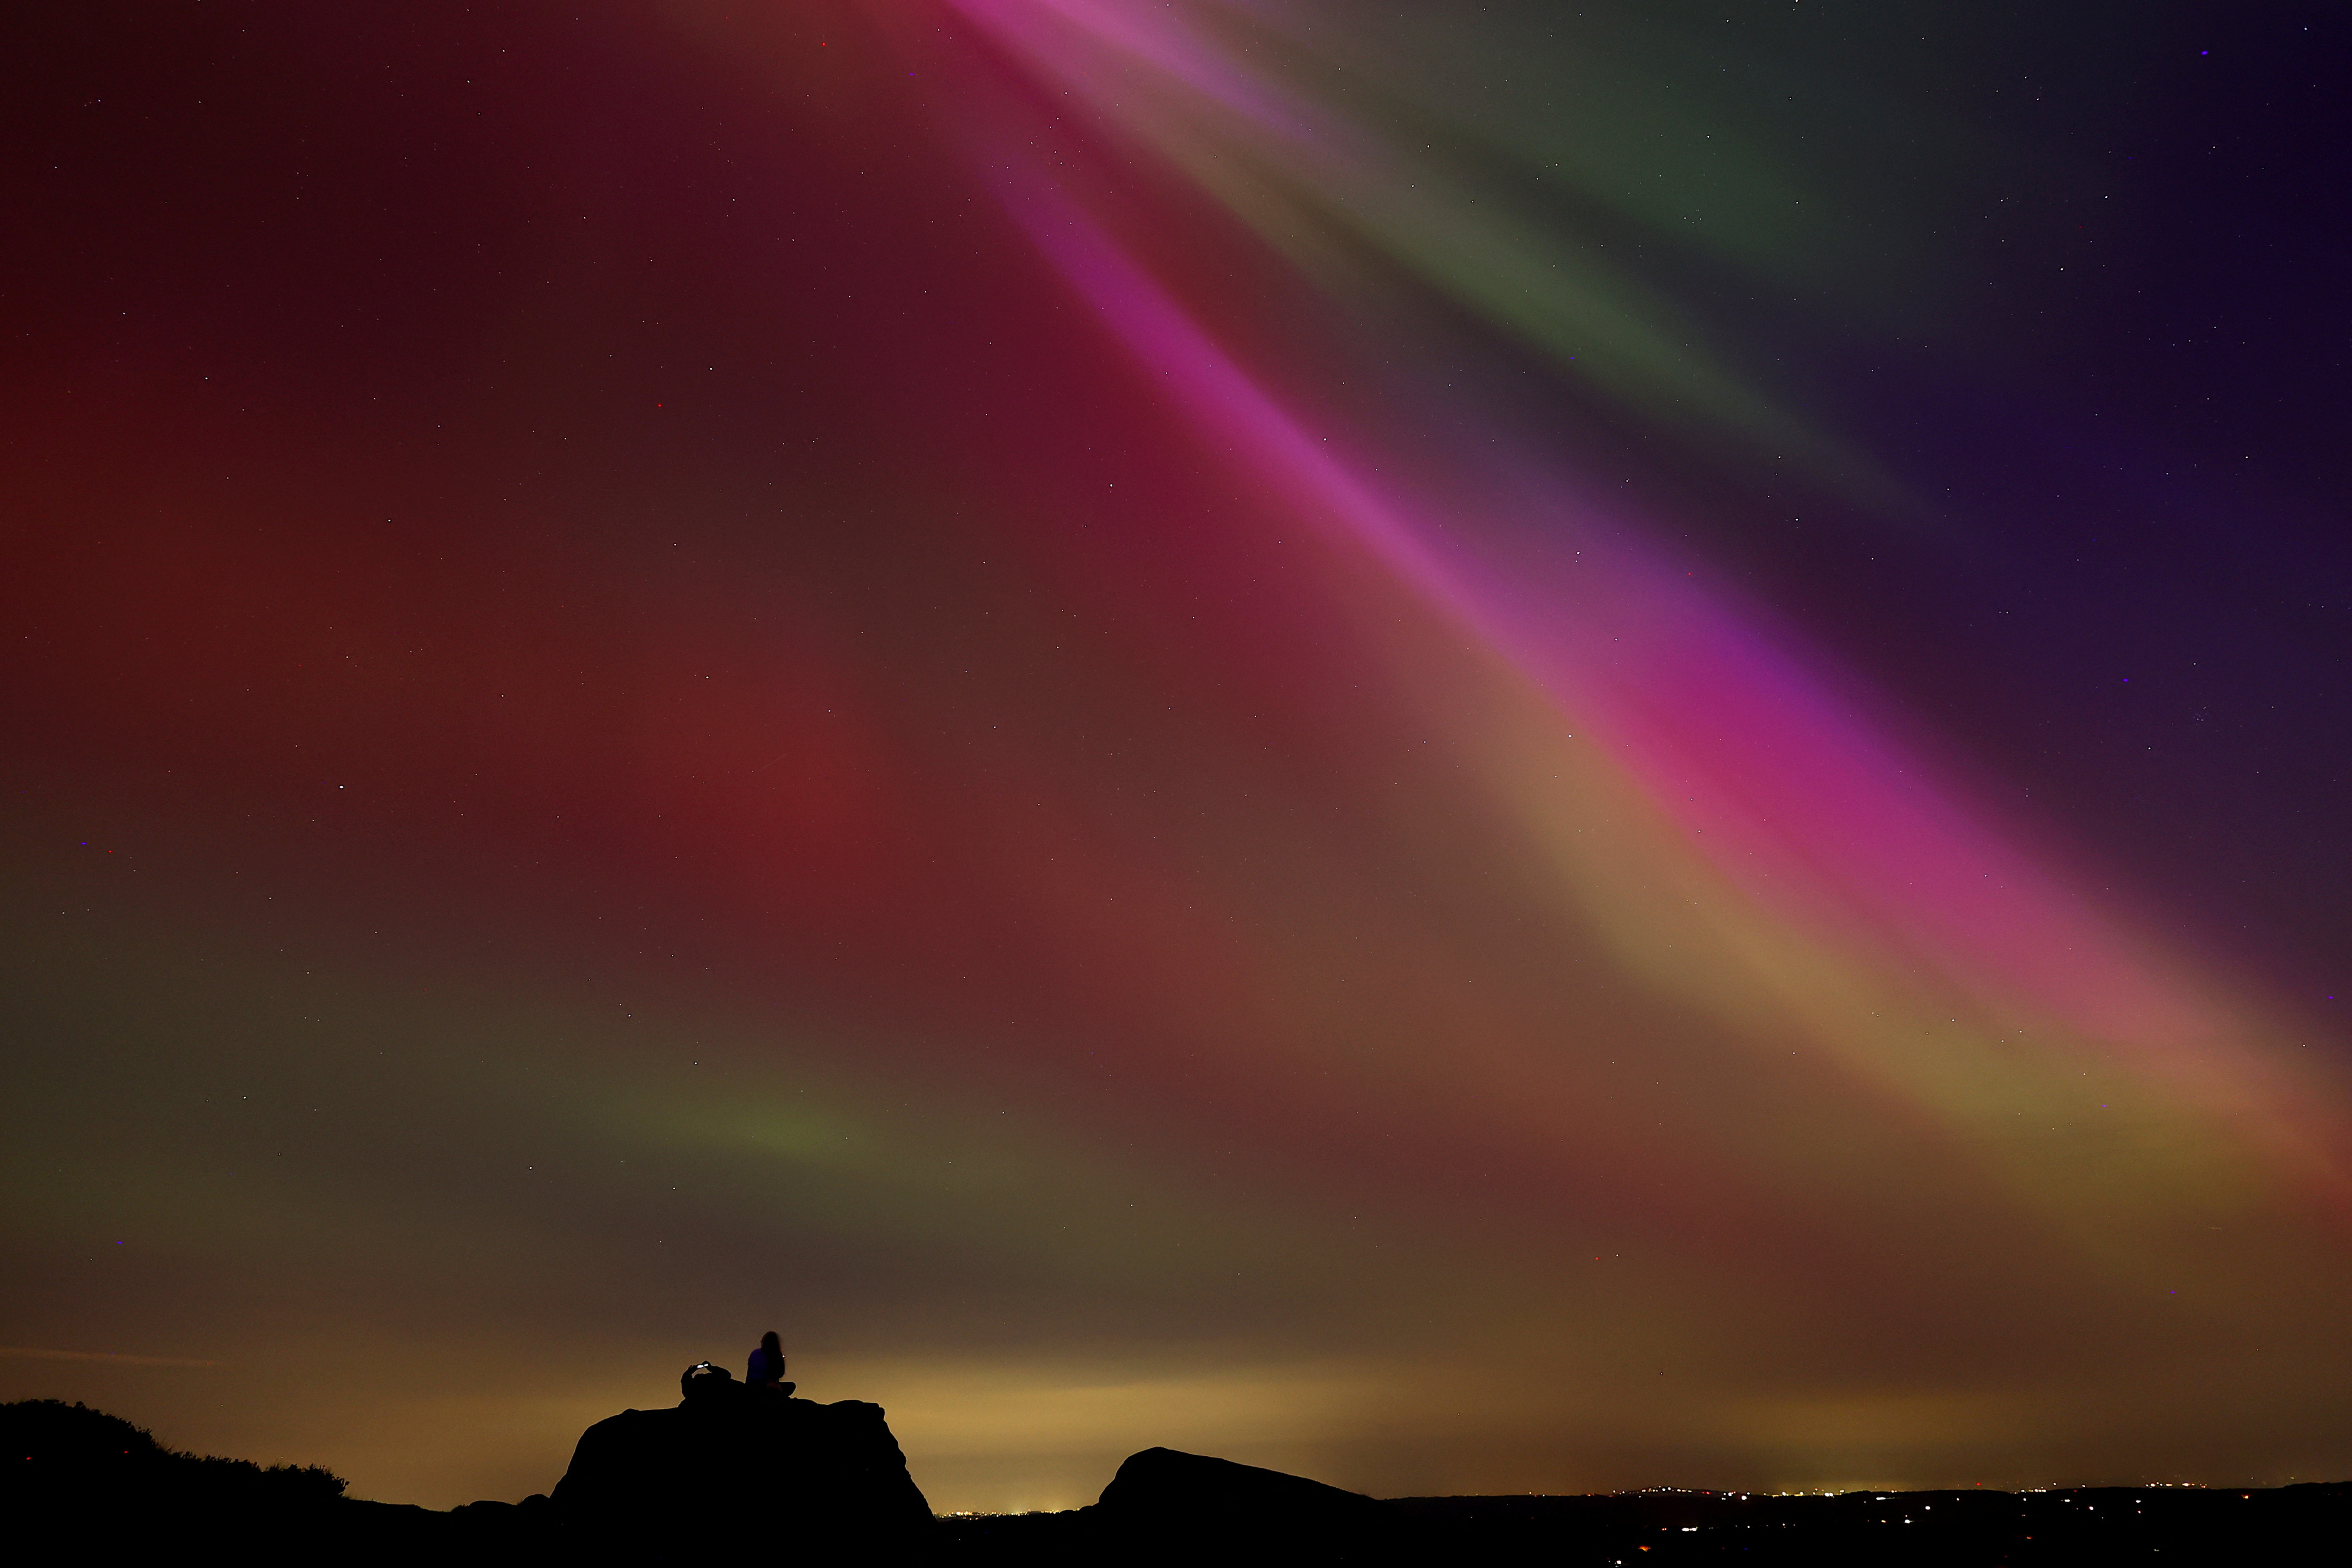 The aurora borealis, also known as the 'northern lights’, are seen over The Roaches near Leek